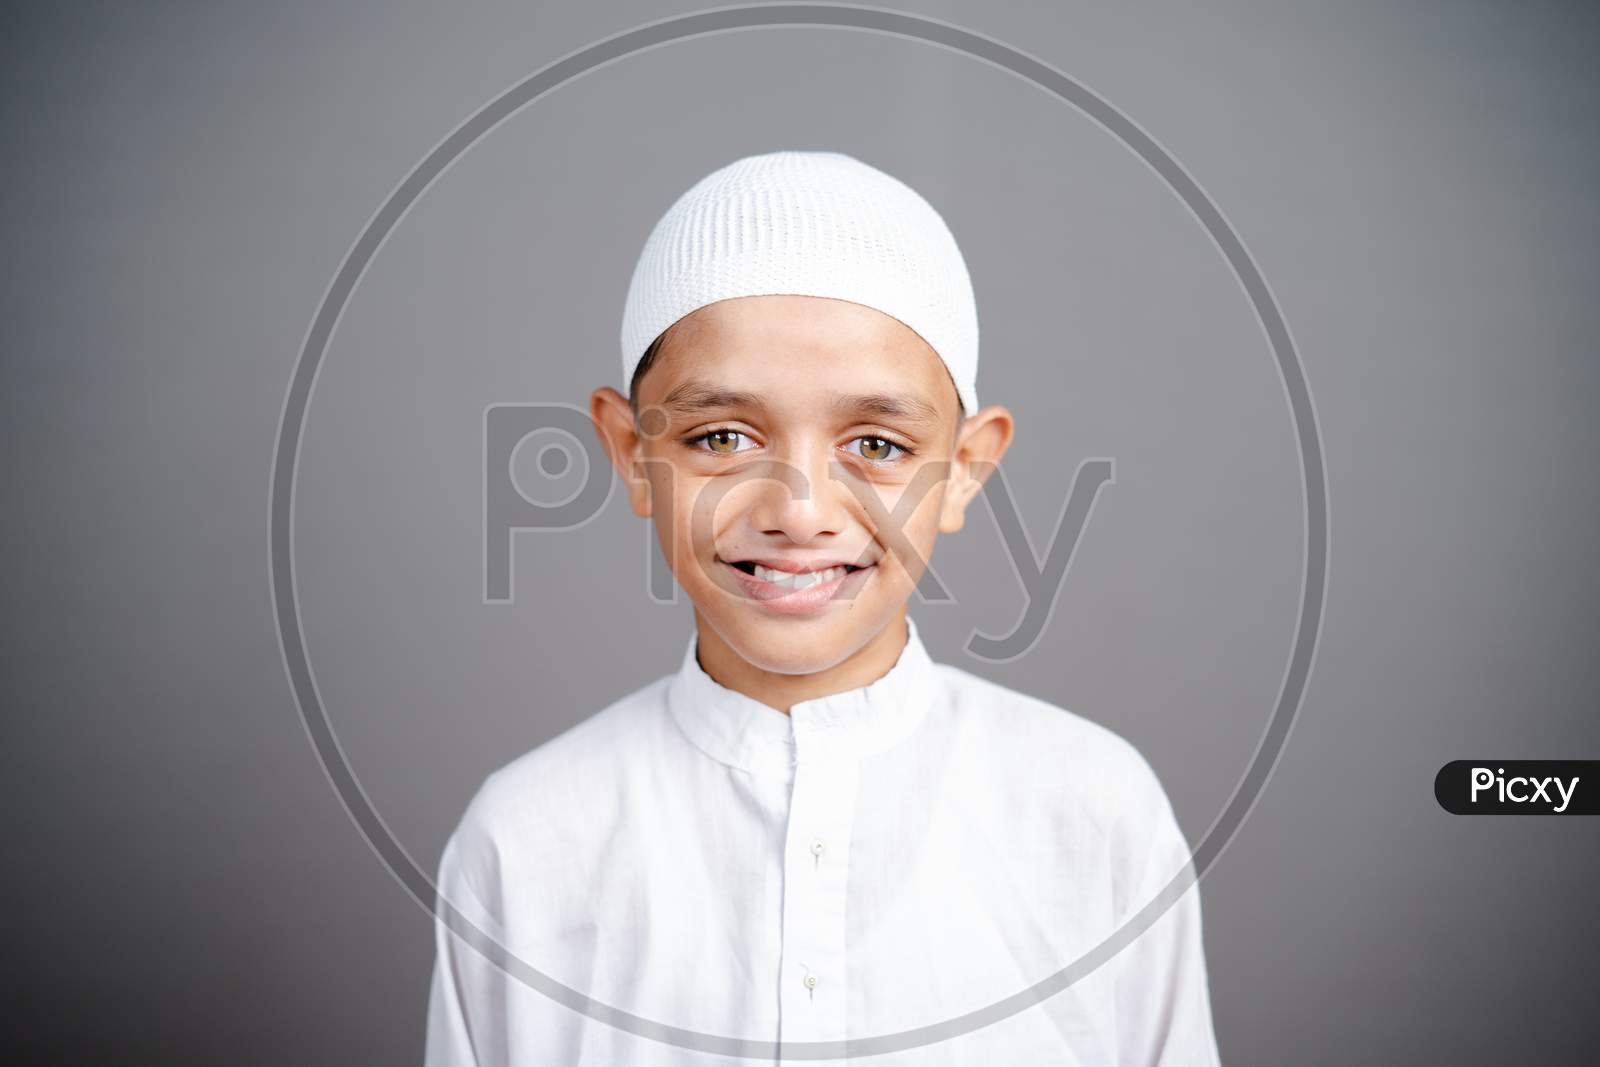 Smiling Muslim Child With Traditional Cap By Looking At Camera On Gray Background - Concept Showing Of Happiness, Positive Emotion During Childhood